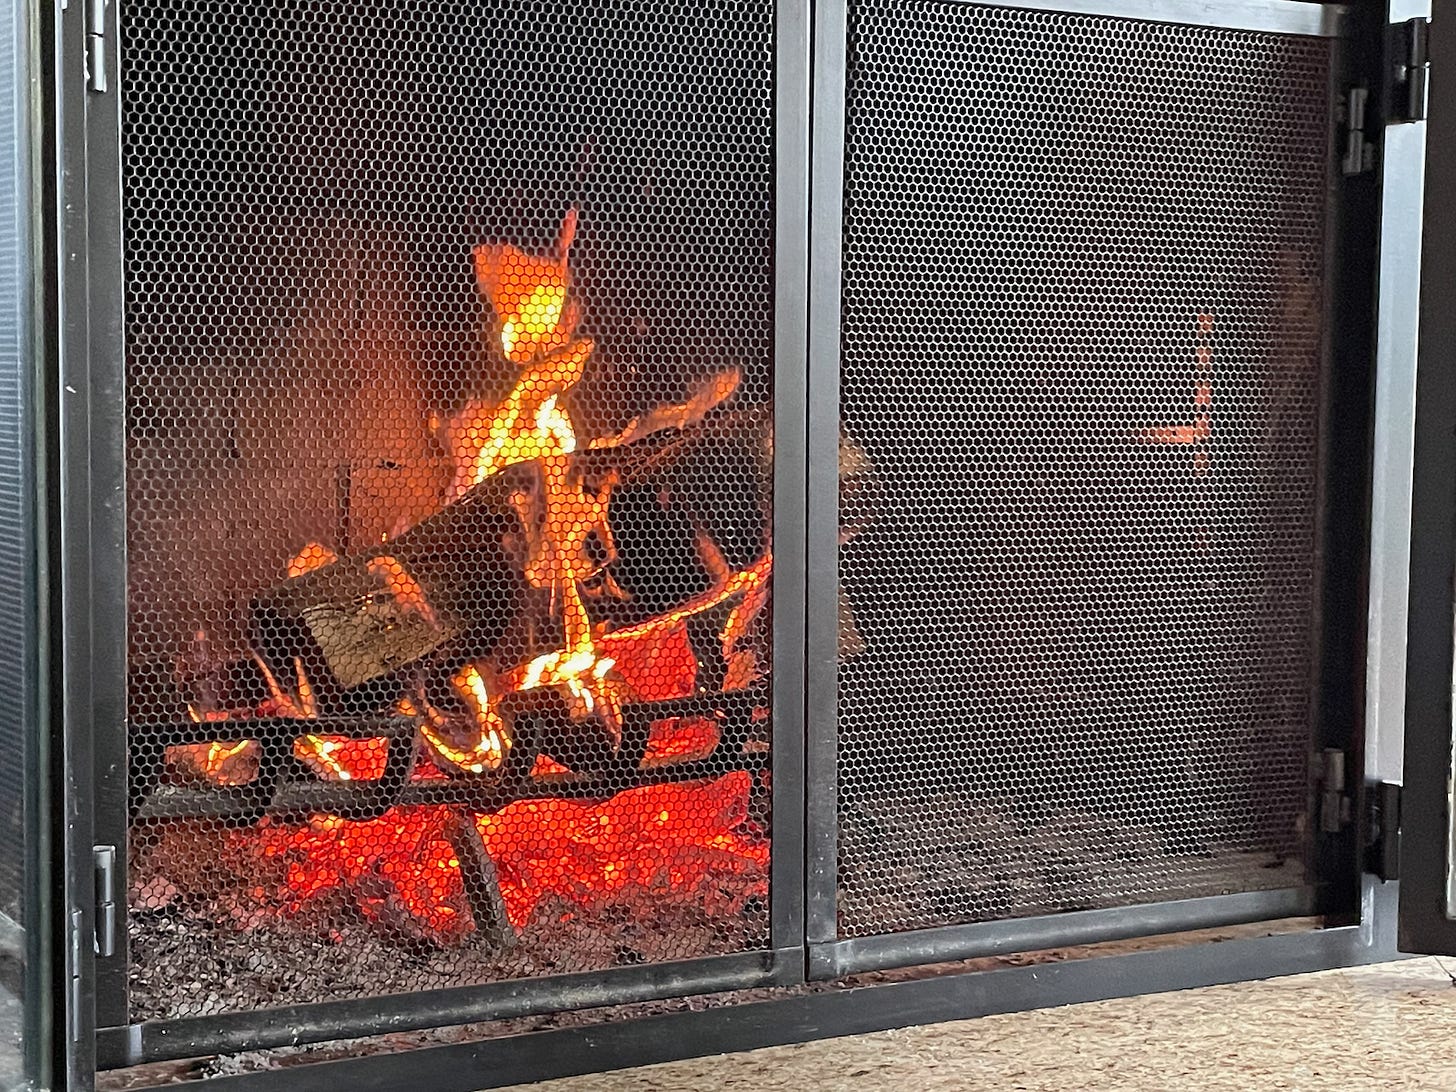 When this fireplace is fully loaded, it threw off enough heat to melt the silicone used to adhere the glass to the doors.